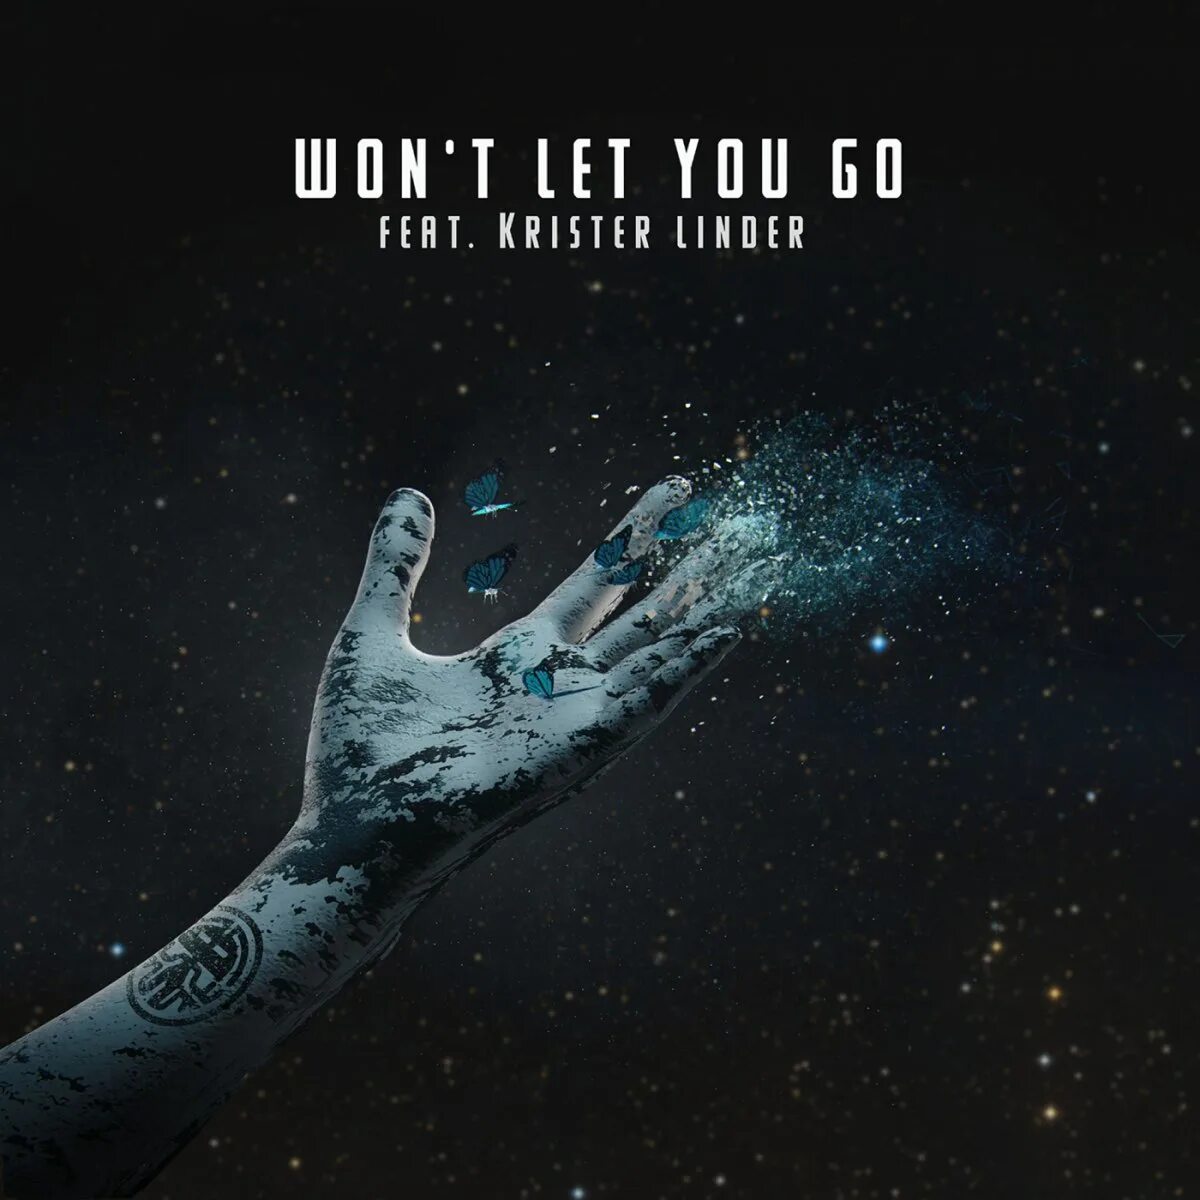 Let you go. You won't. Let you go картинки. Letting you go. Песни i let you go